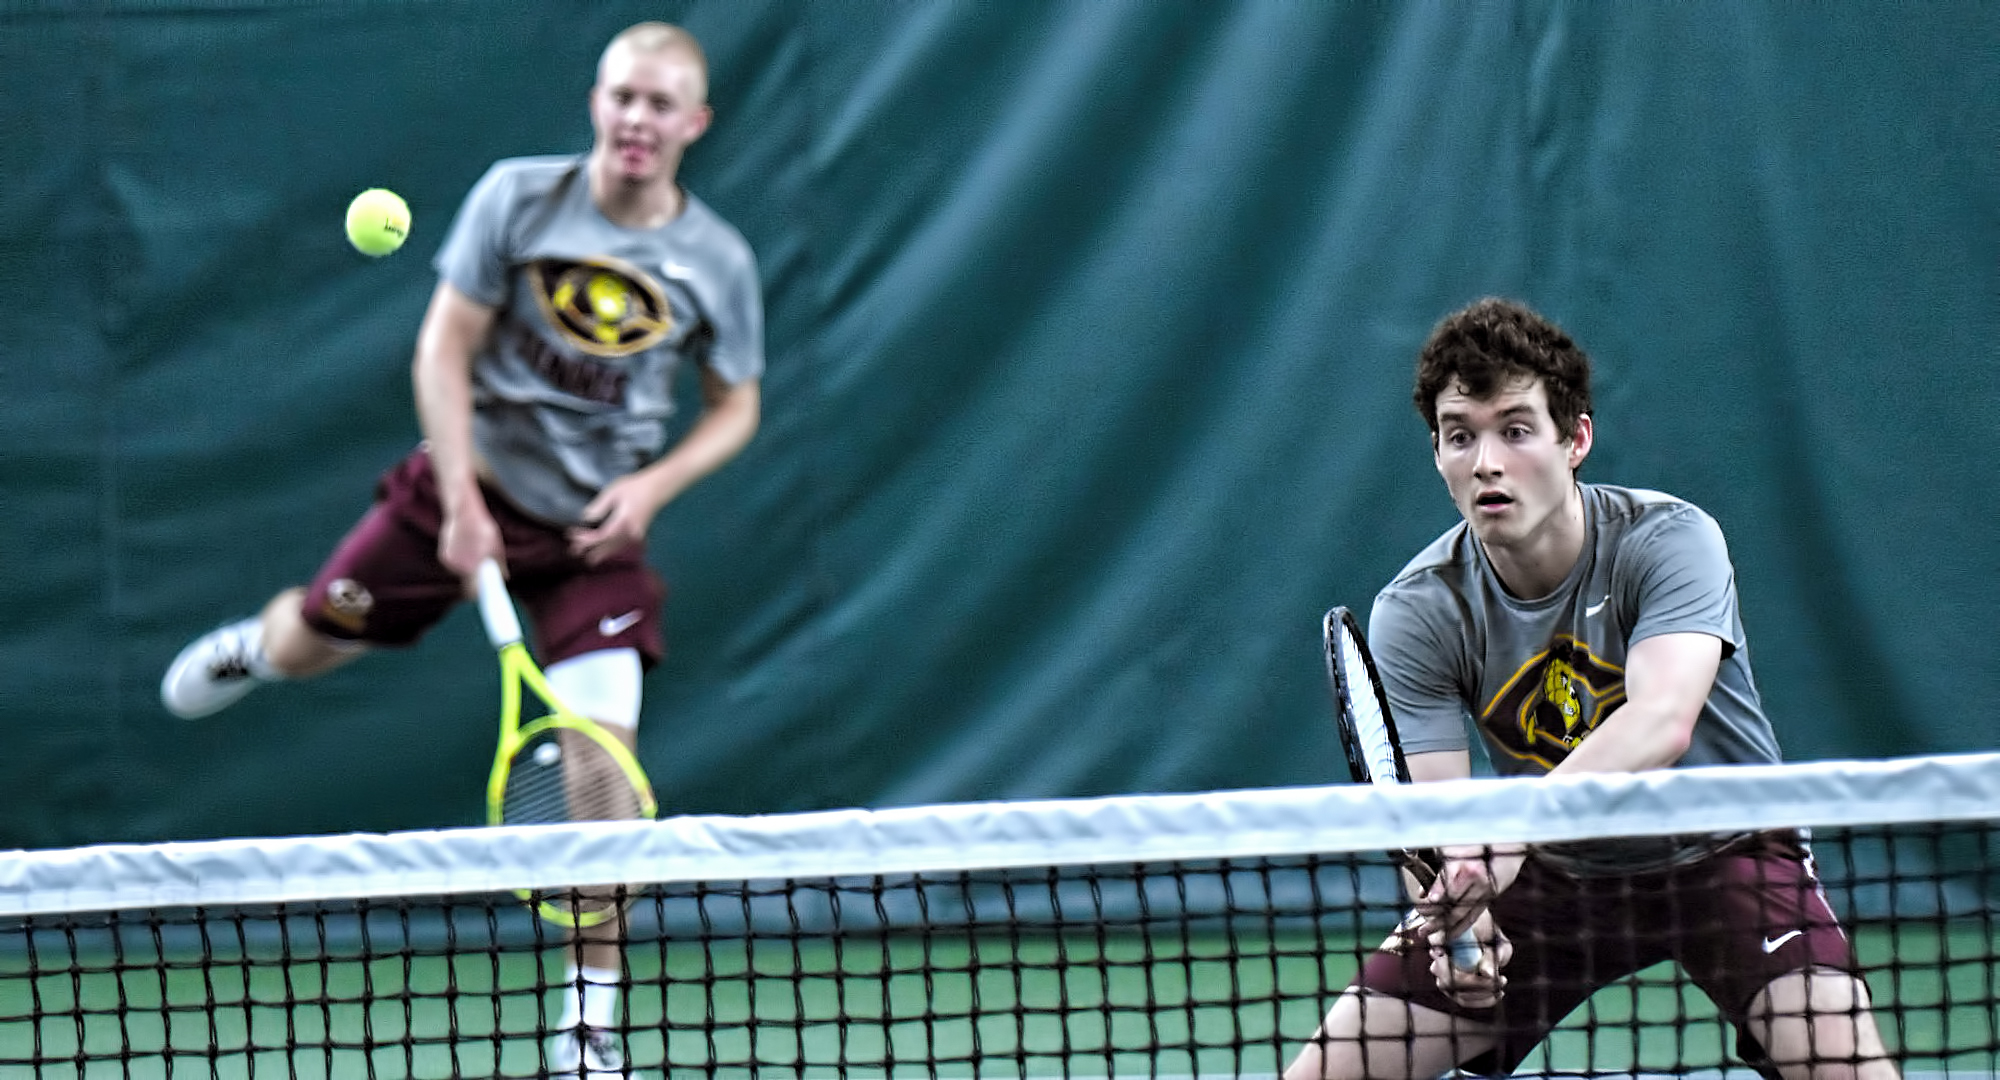 Jared Saue makes the serve and doubles partner Erik Porter waits for the return in their match at No.1 doubles. The tandem won 8-6 in their match with St. John's.